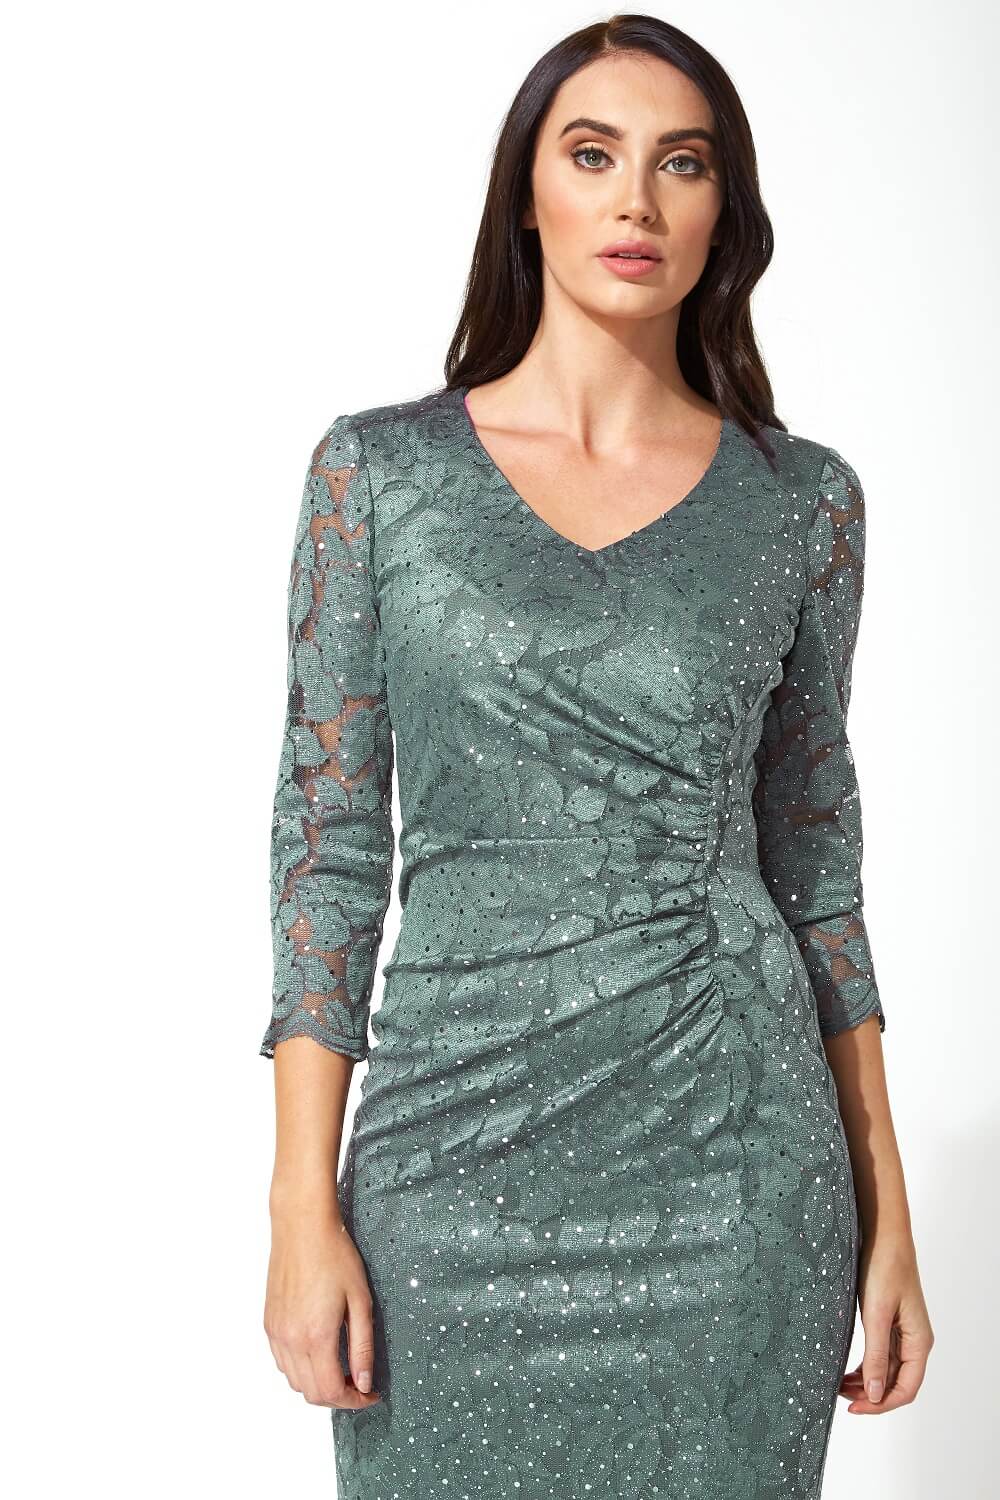 Green Lace Sequin Ruched Dress, Image 4 of 5